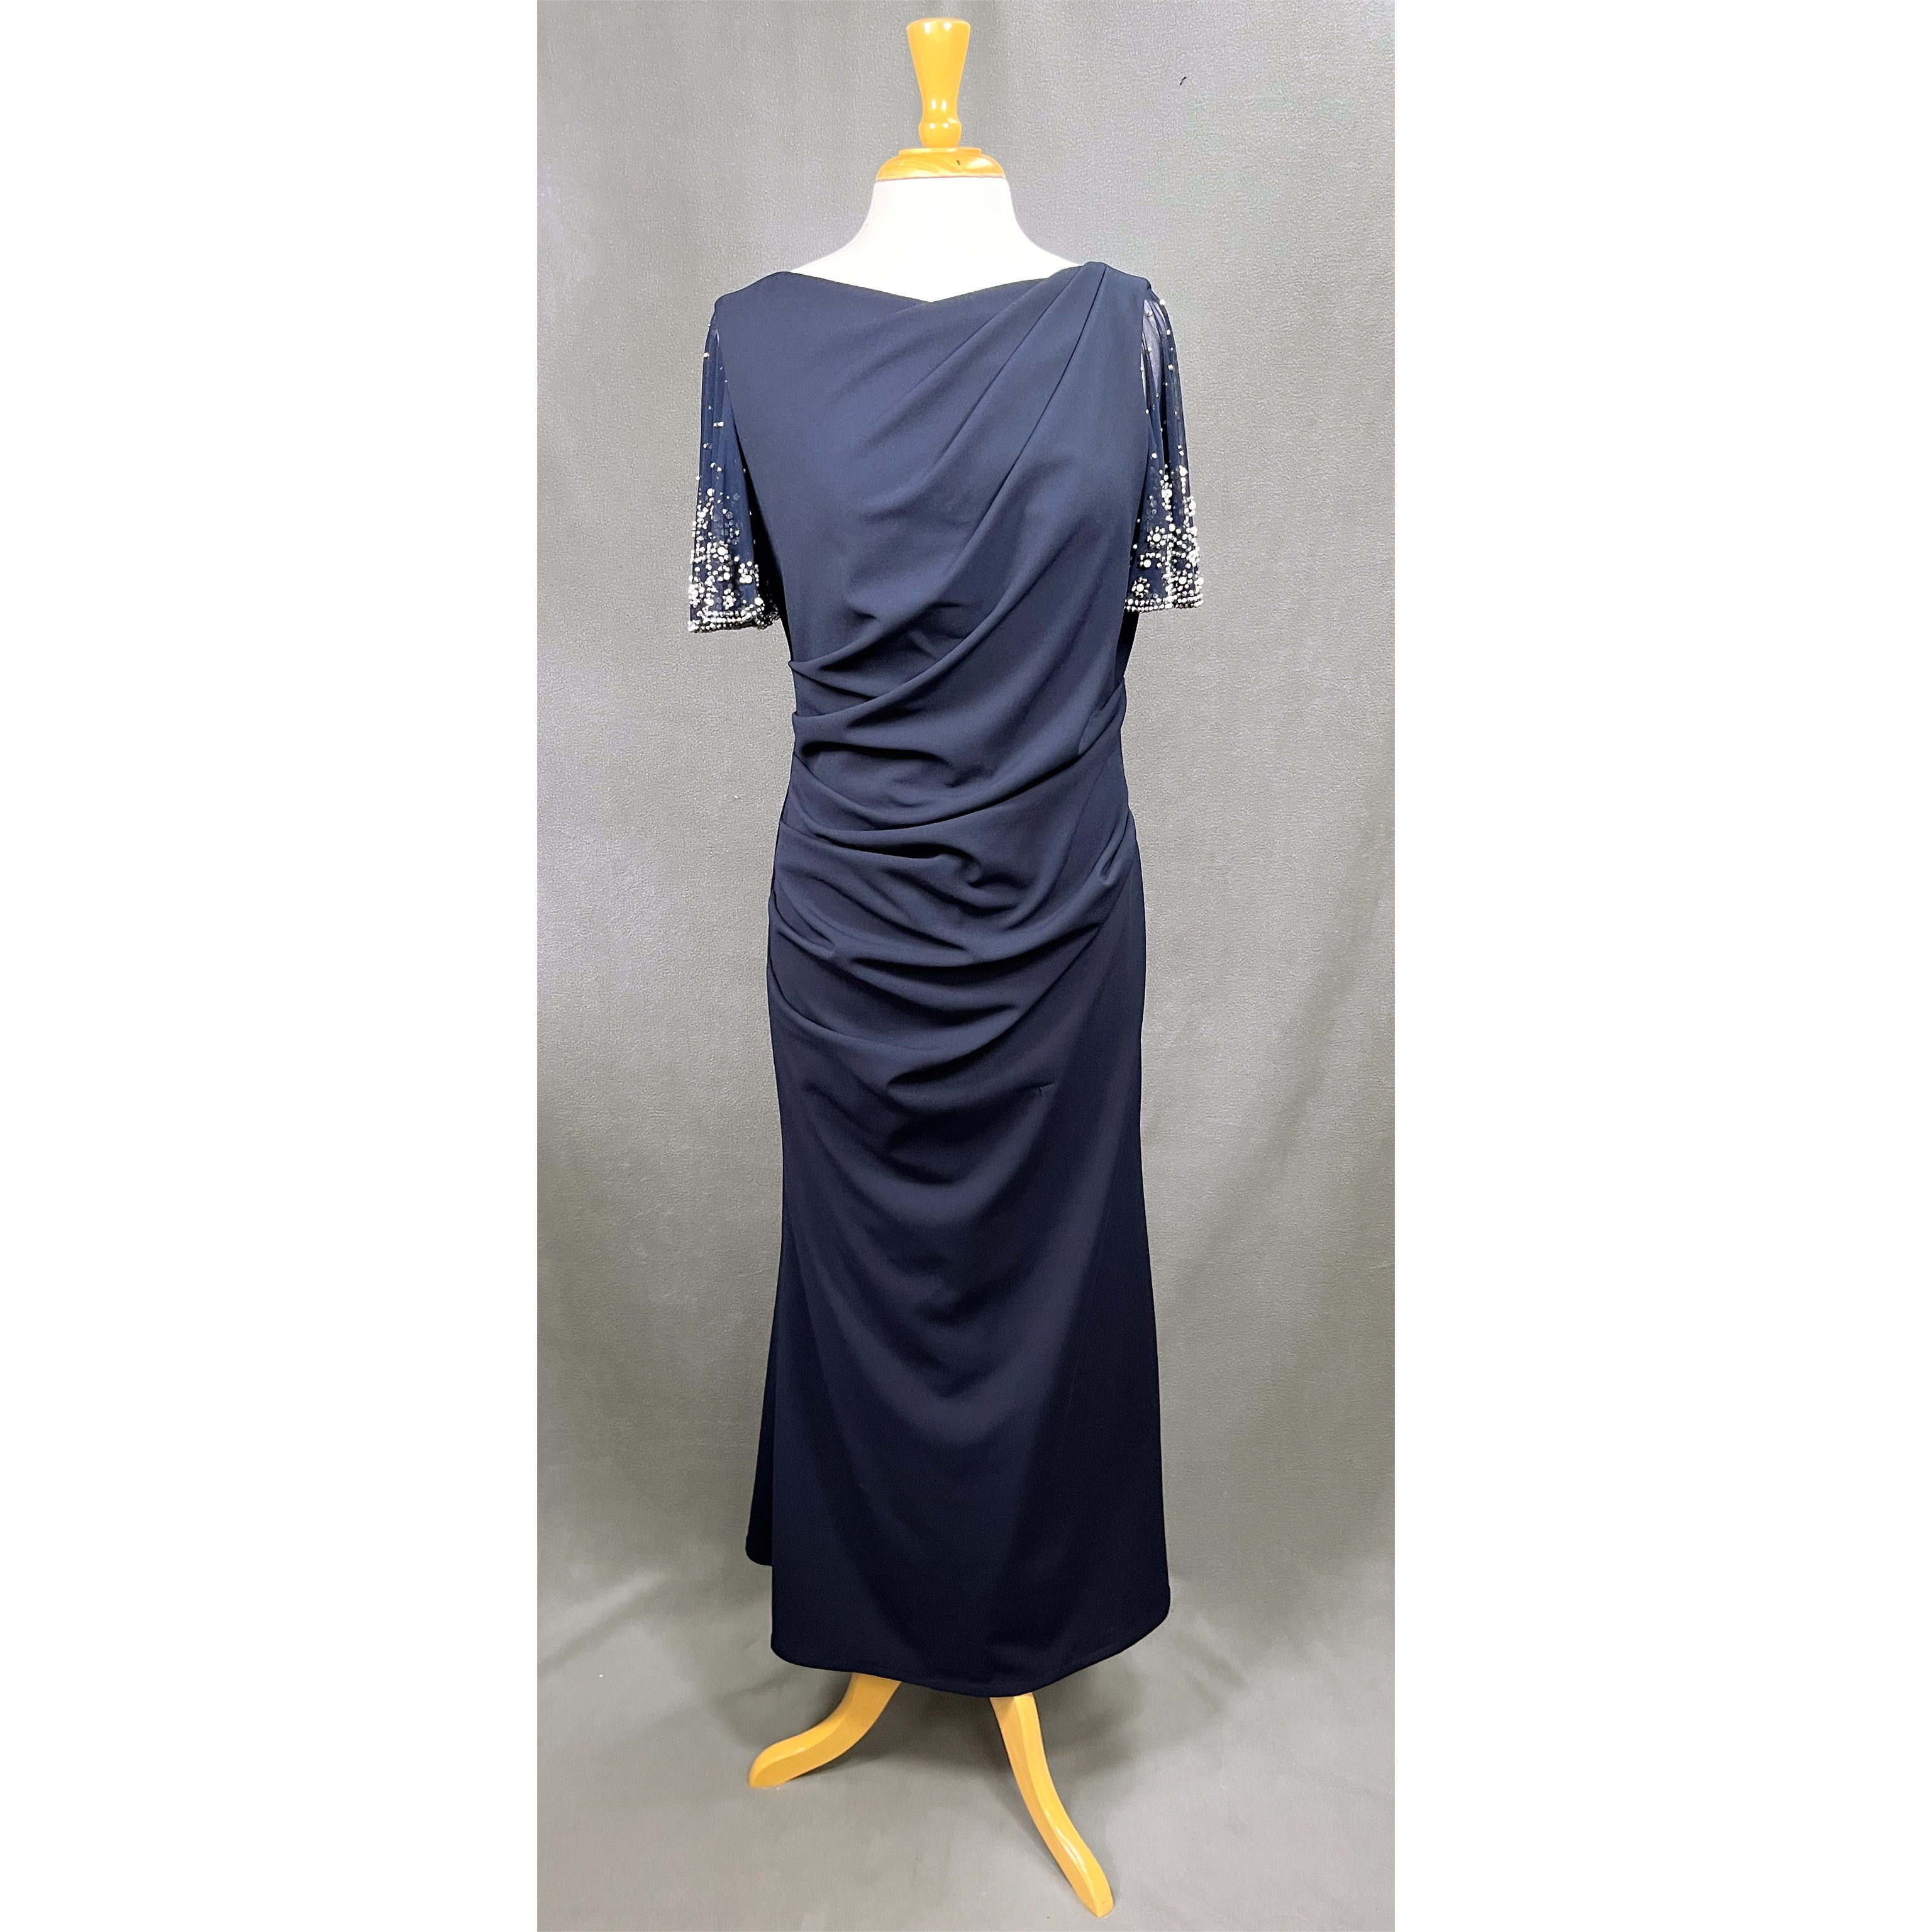 Betsy & Adam navy dress with beaded sleeves, size 12P